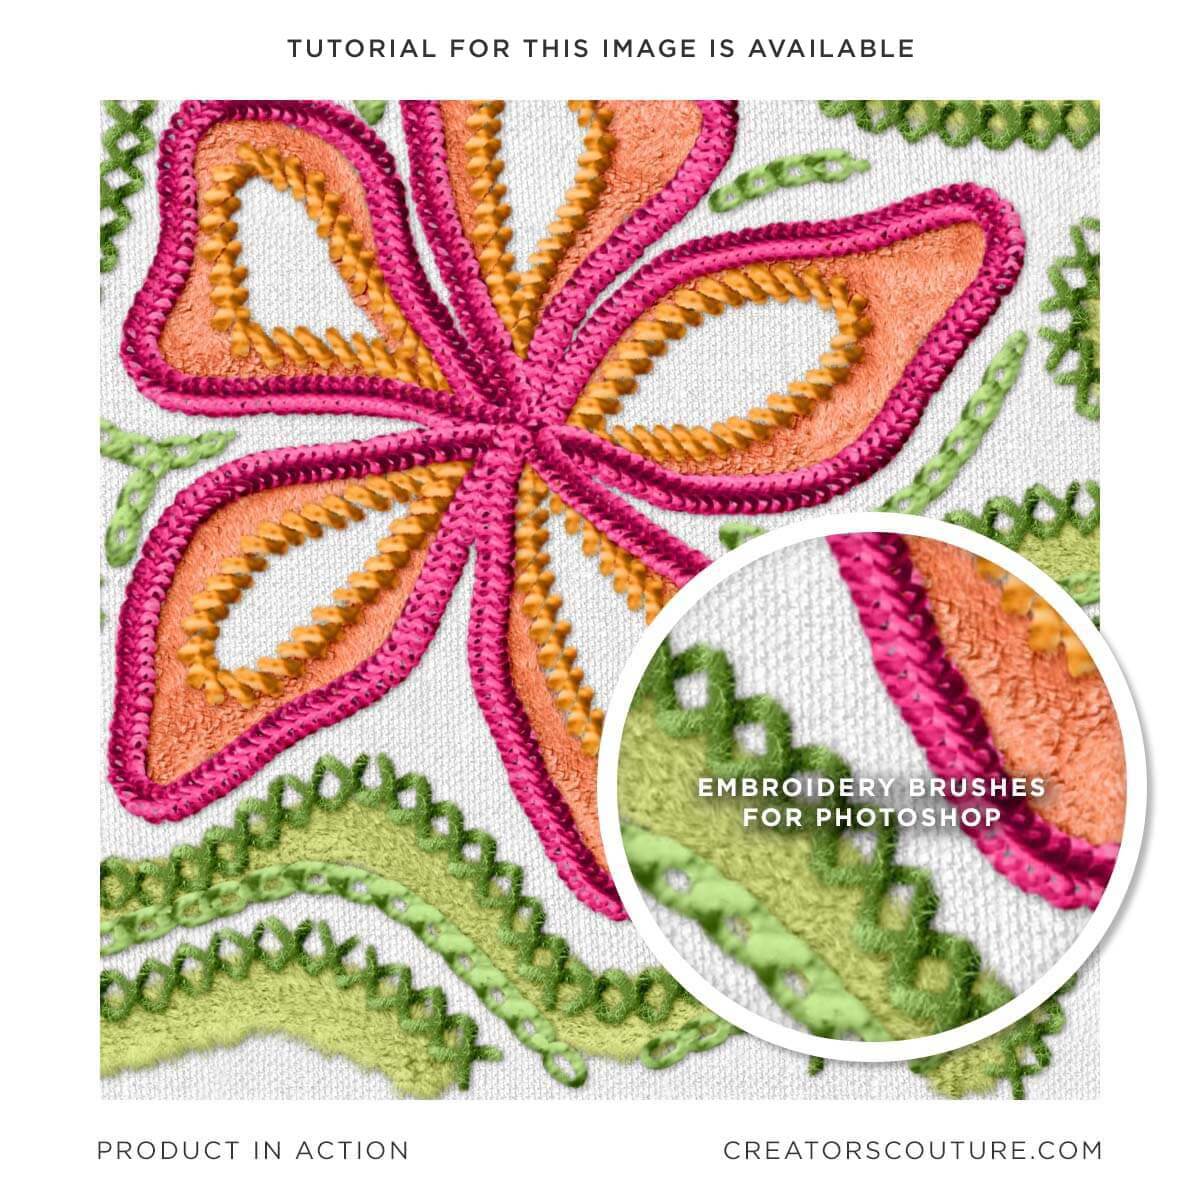 Floral motif illustration in embroidery and stitched style, created in Photoshop, close-up of realistic, 3-D style created with specially designed Photoshop brushes 